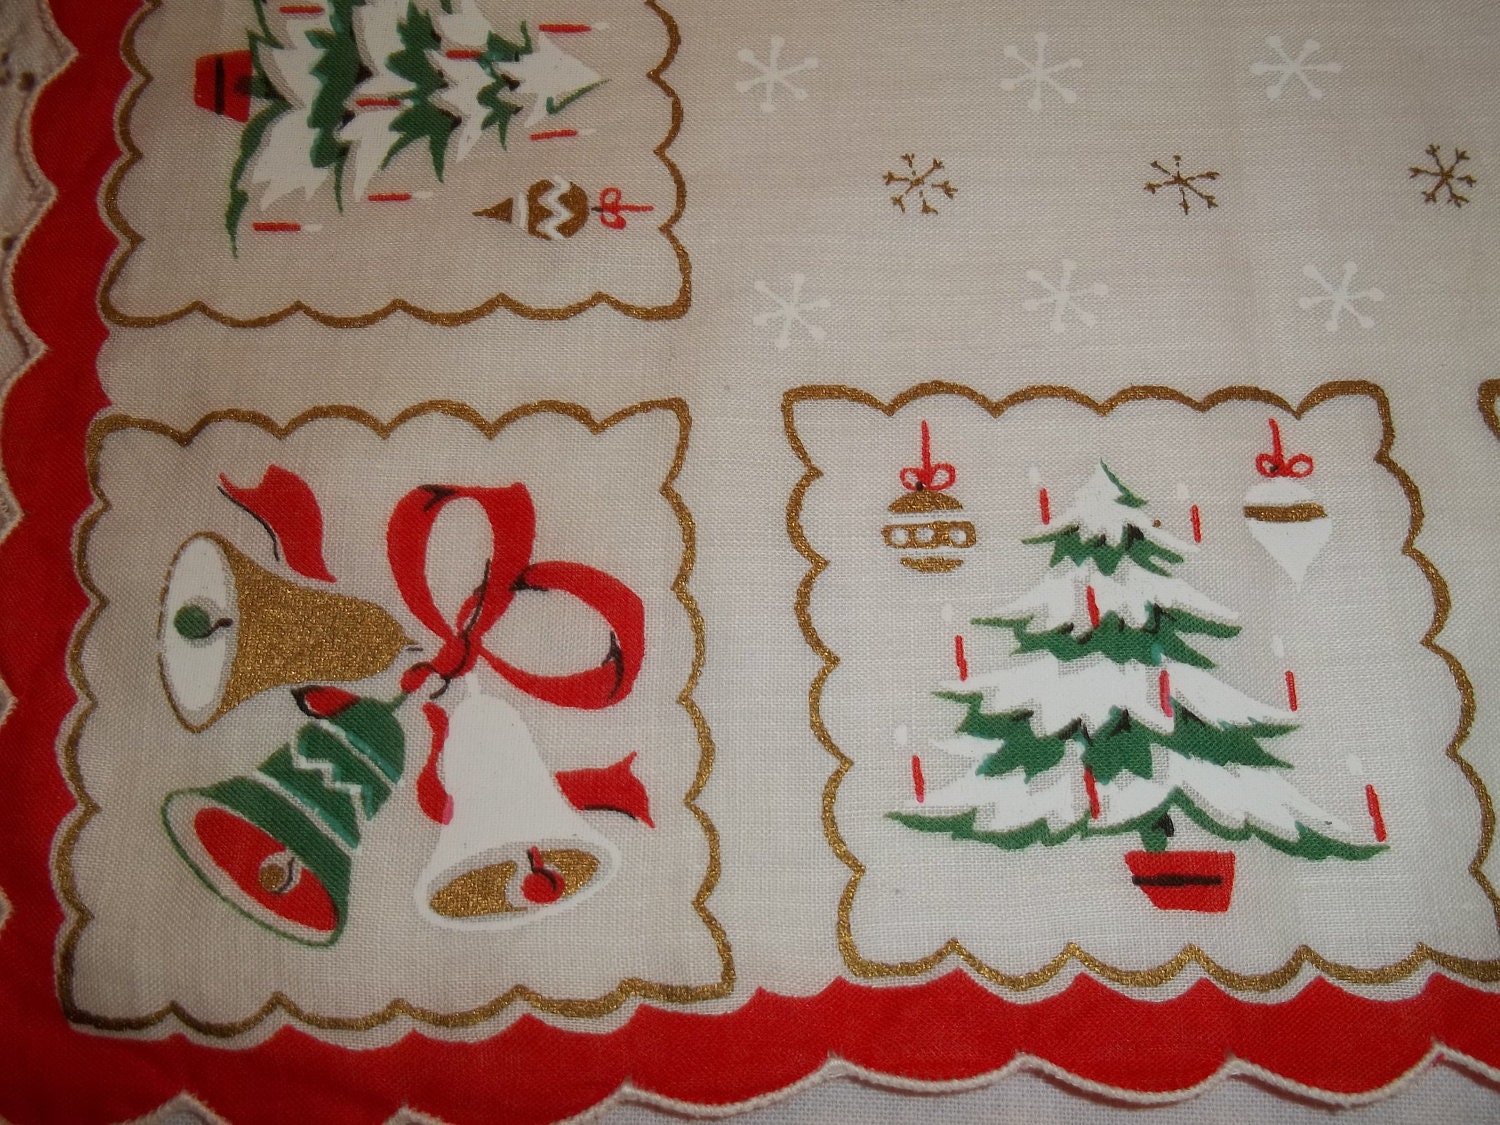 Vintage Christmas Handkerchief Hankie Hanky Mid Century Eames era Alternating Bells and Tree with Scallops and Snowflakes - Route66StLouis